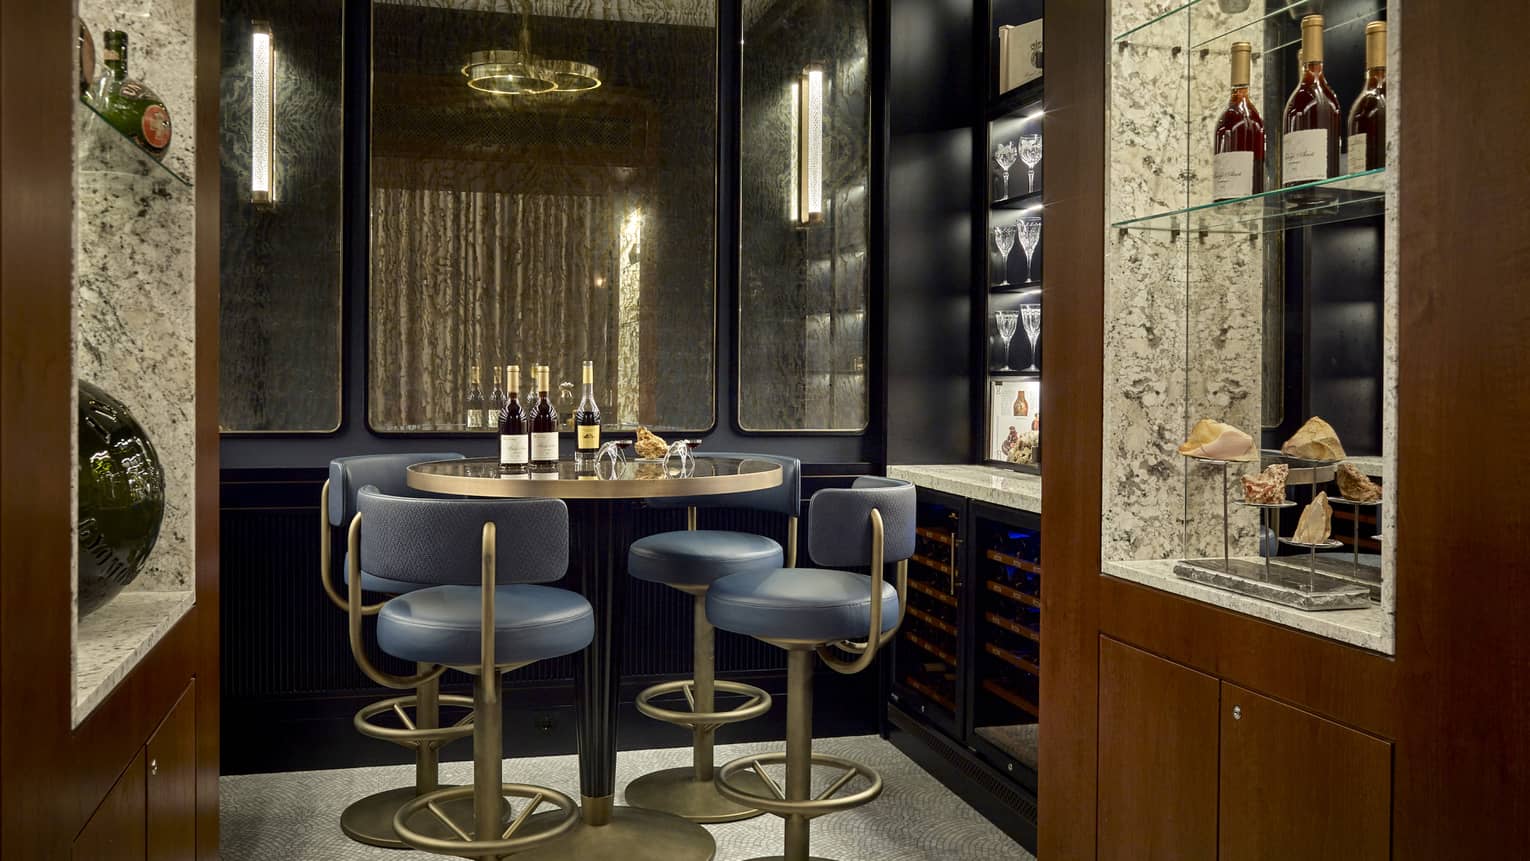 Dark private lounge area with navy and gold barstools at round high-top gold table, wine bottles